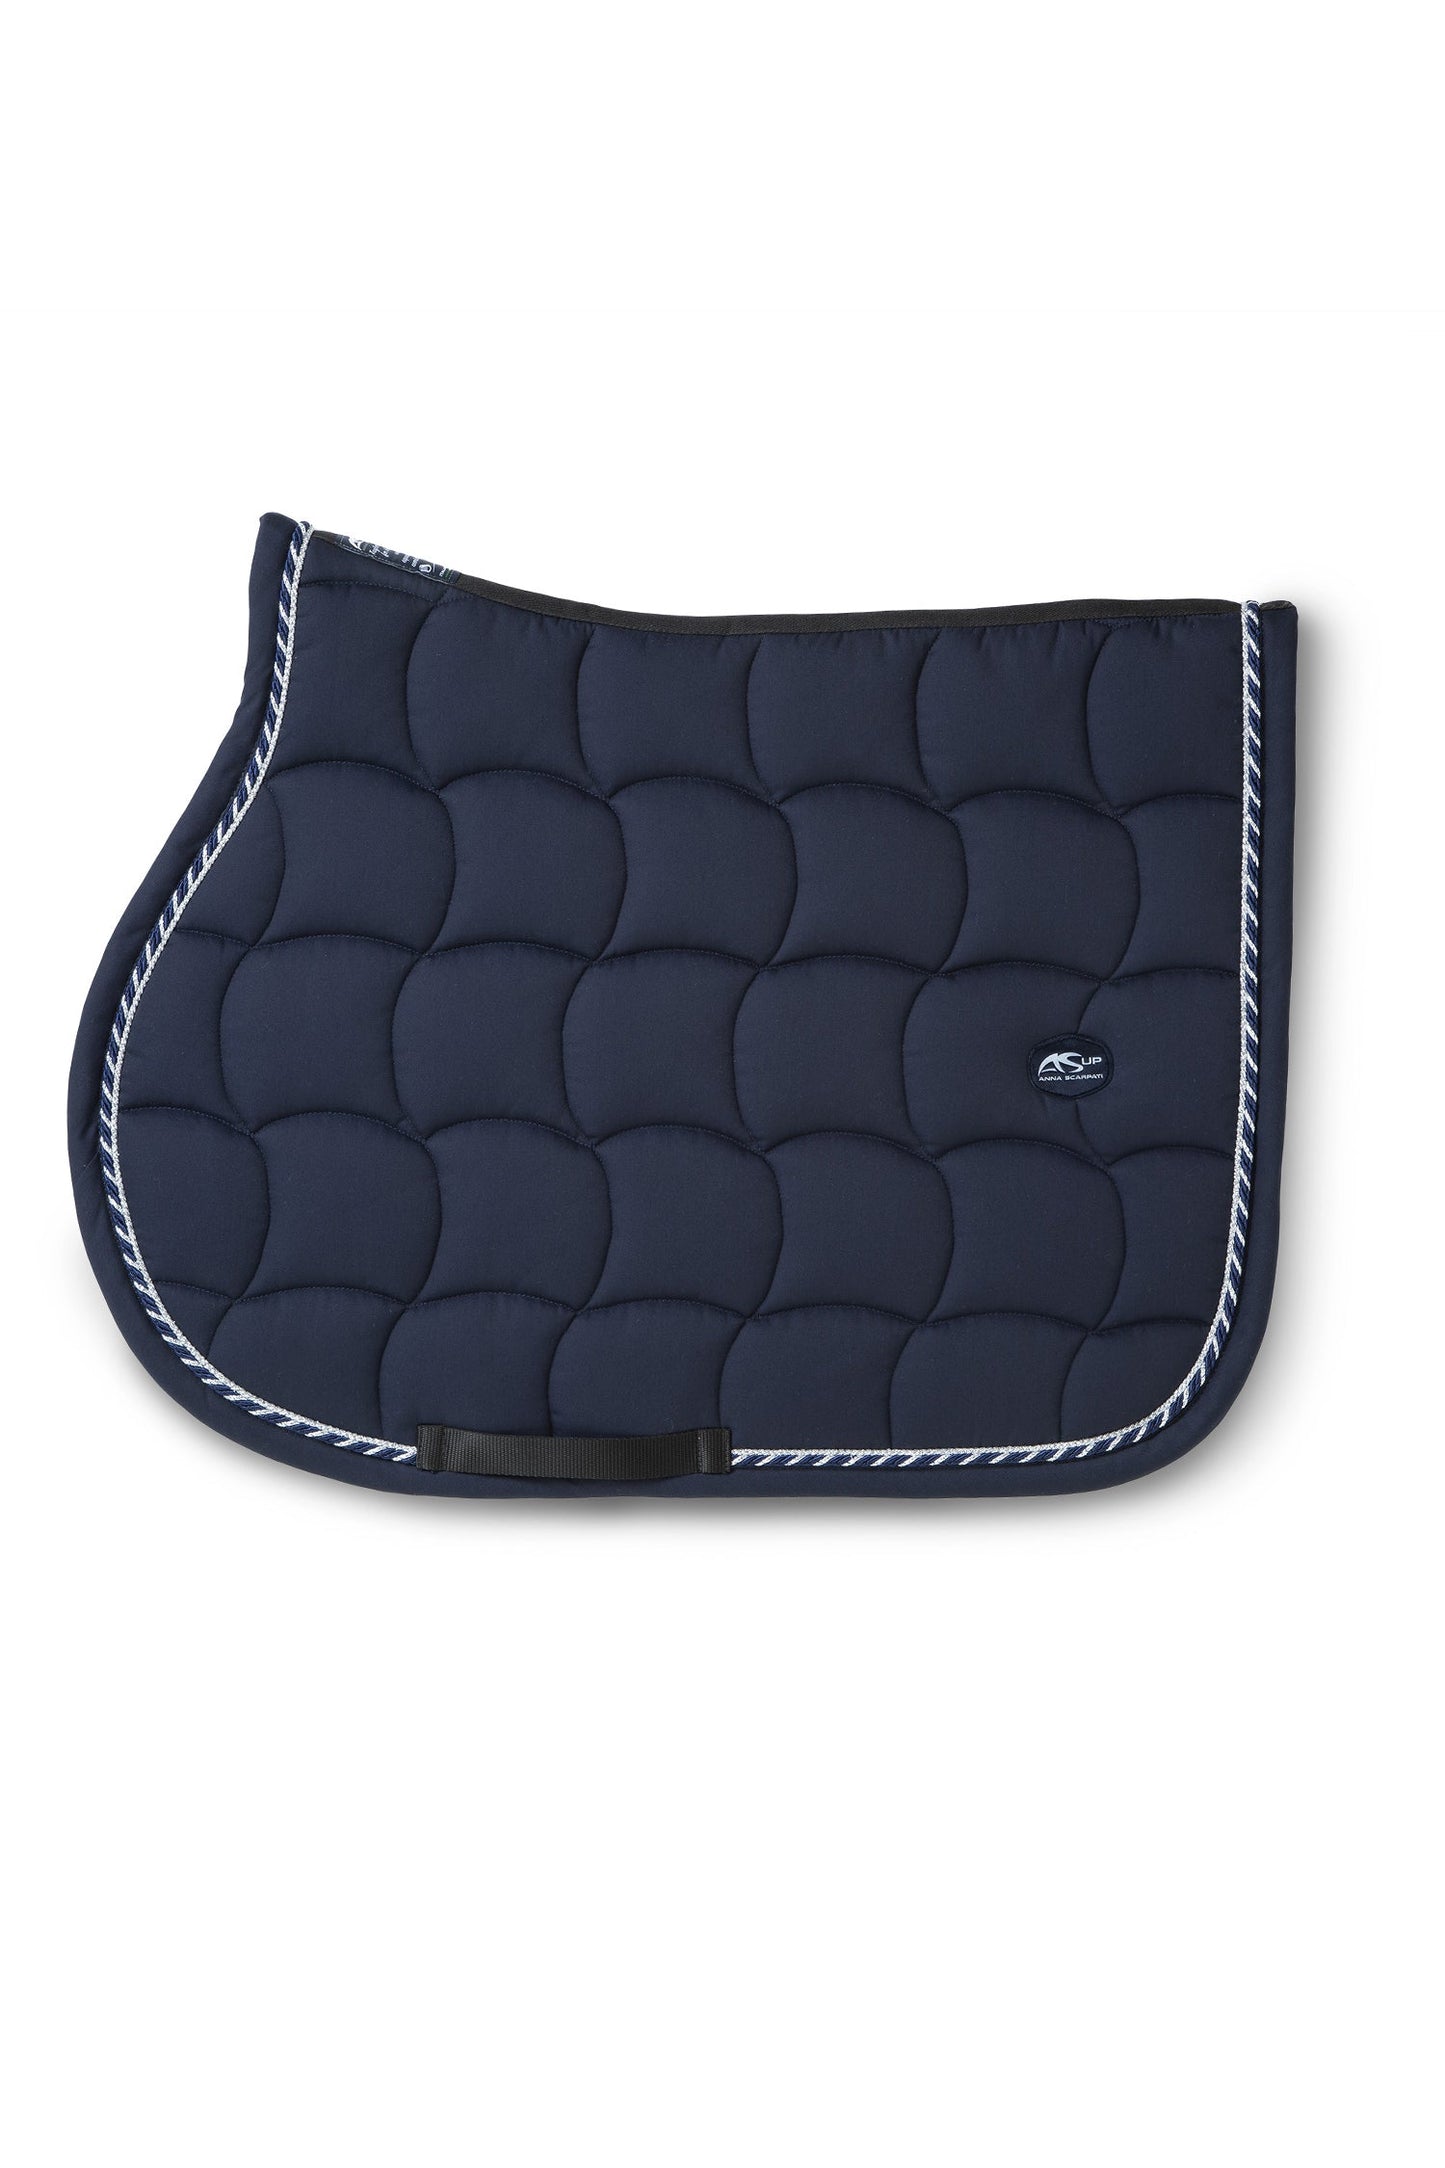 Anna Scarpati quilted horse saddle pad, navy blue with white trim.